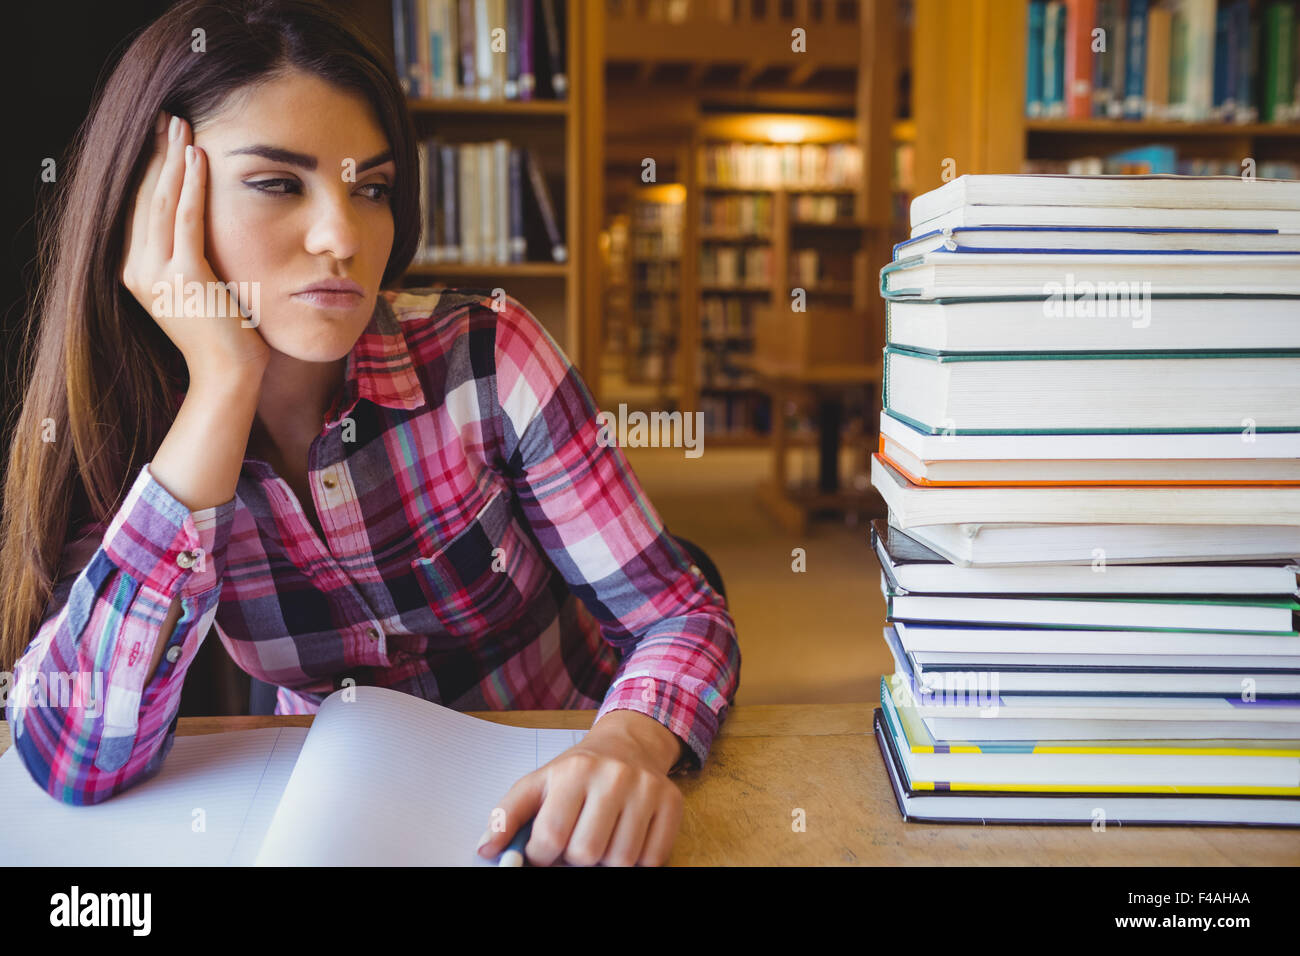 Close-up of thoughtful female student Stock Photo